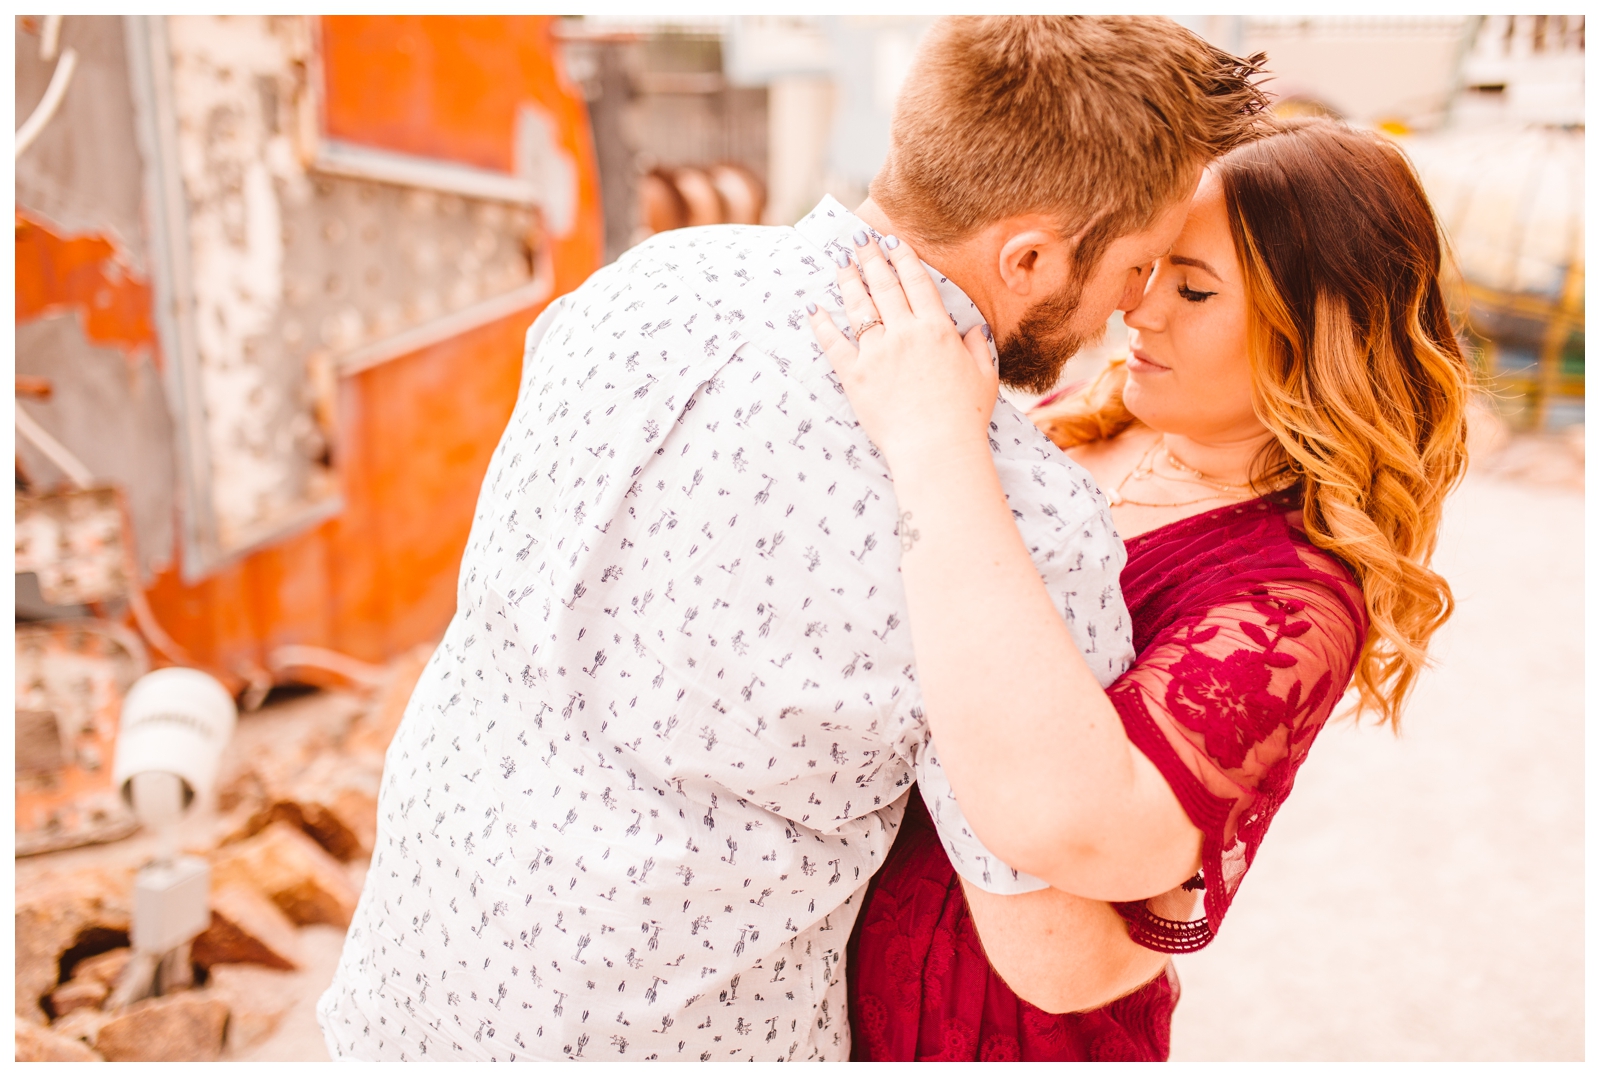 Bright & Quirky Neon Museum Engagement Shoot - Las Vegas, Nevada - Brooke Michelle Photography